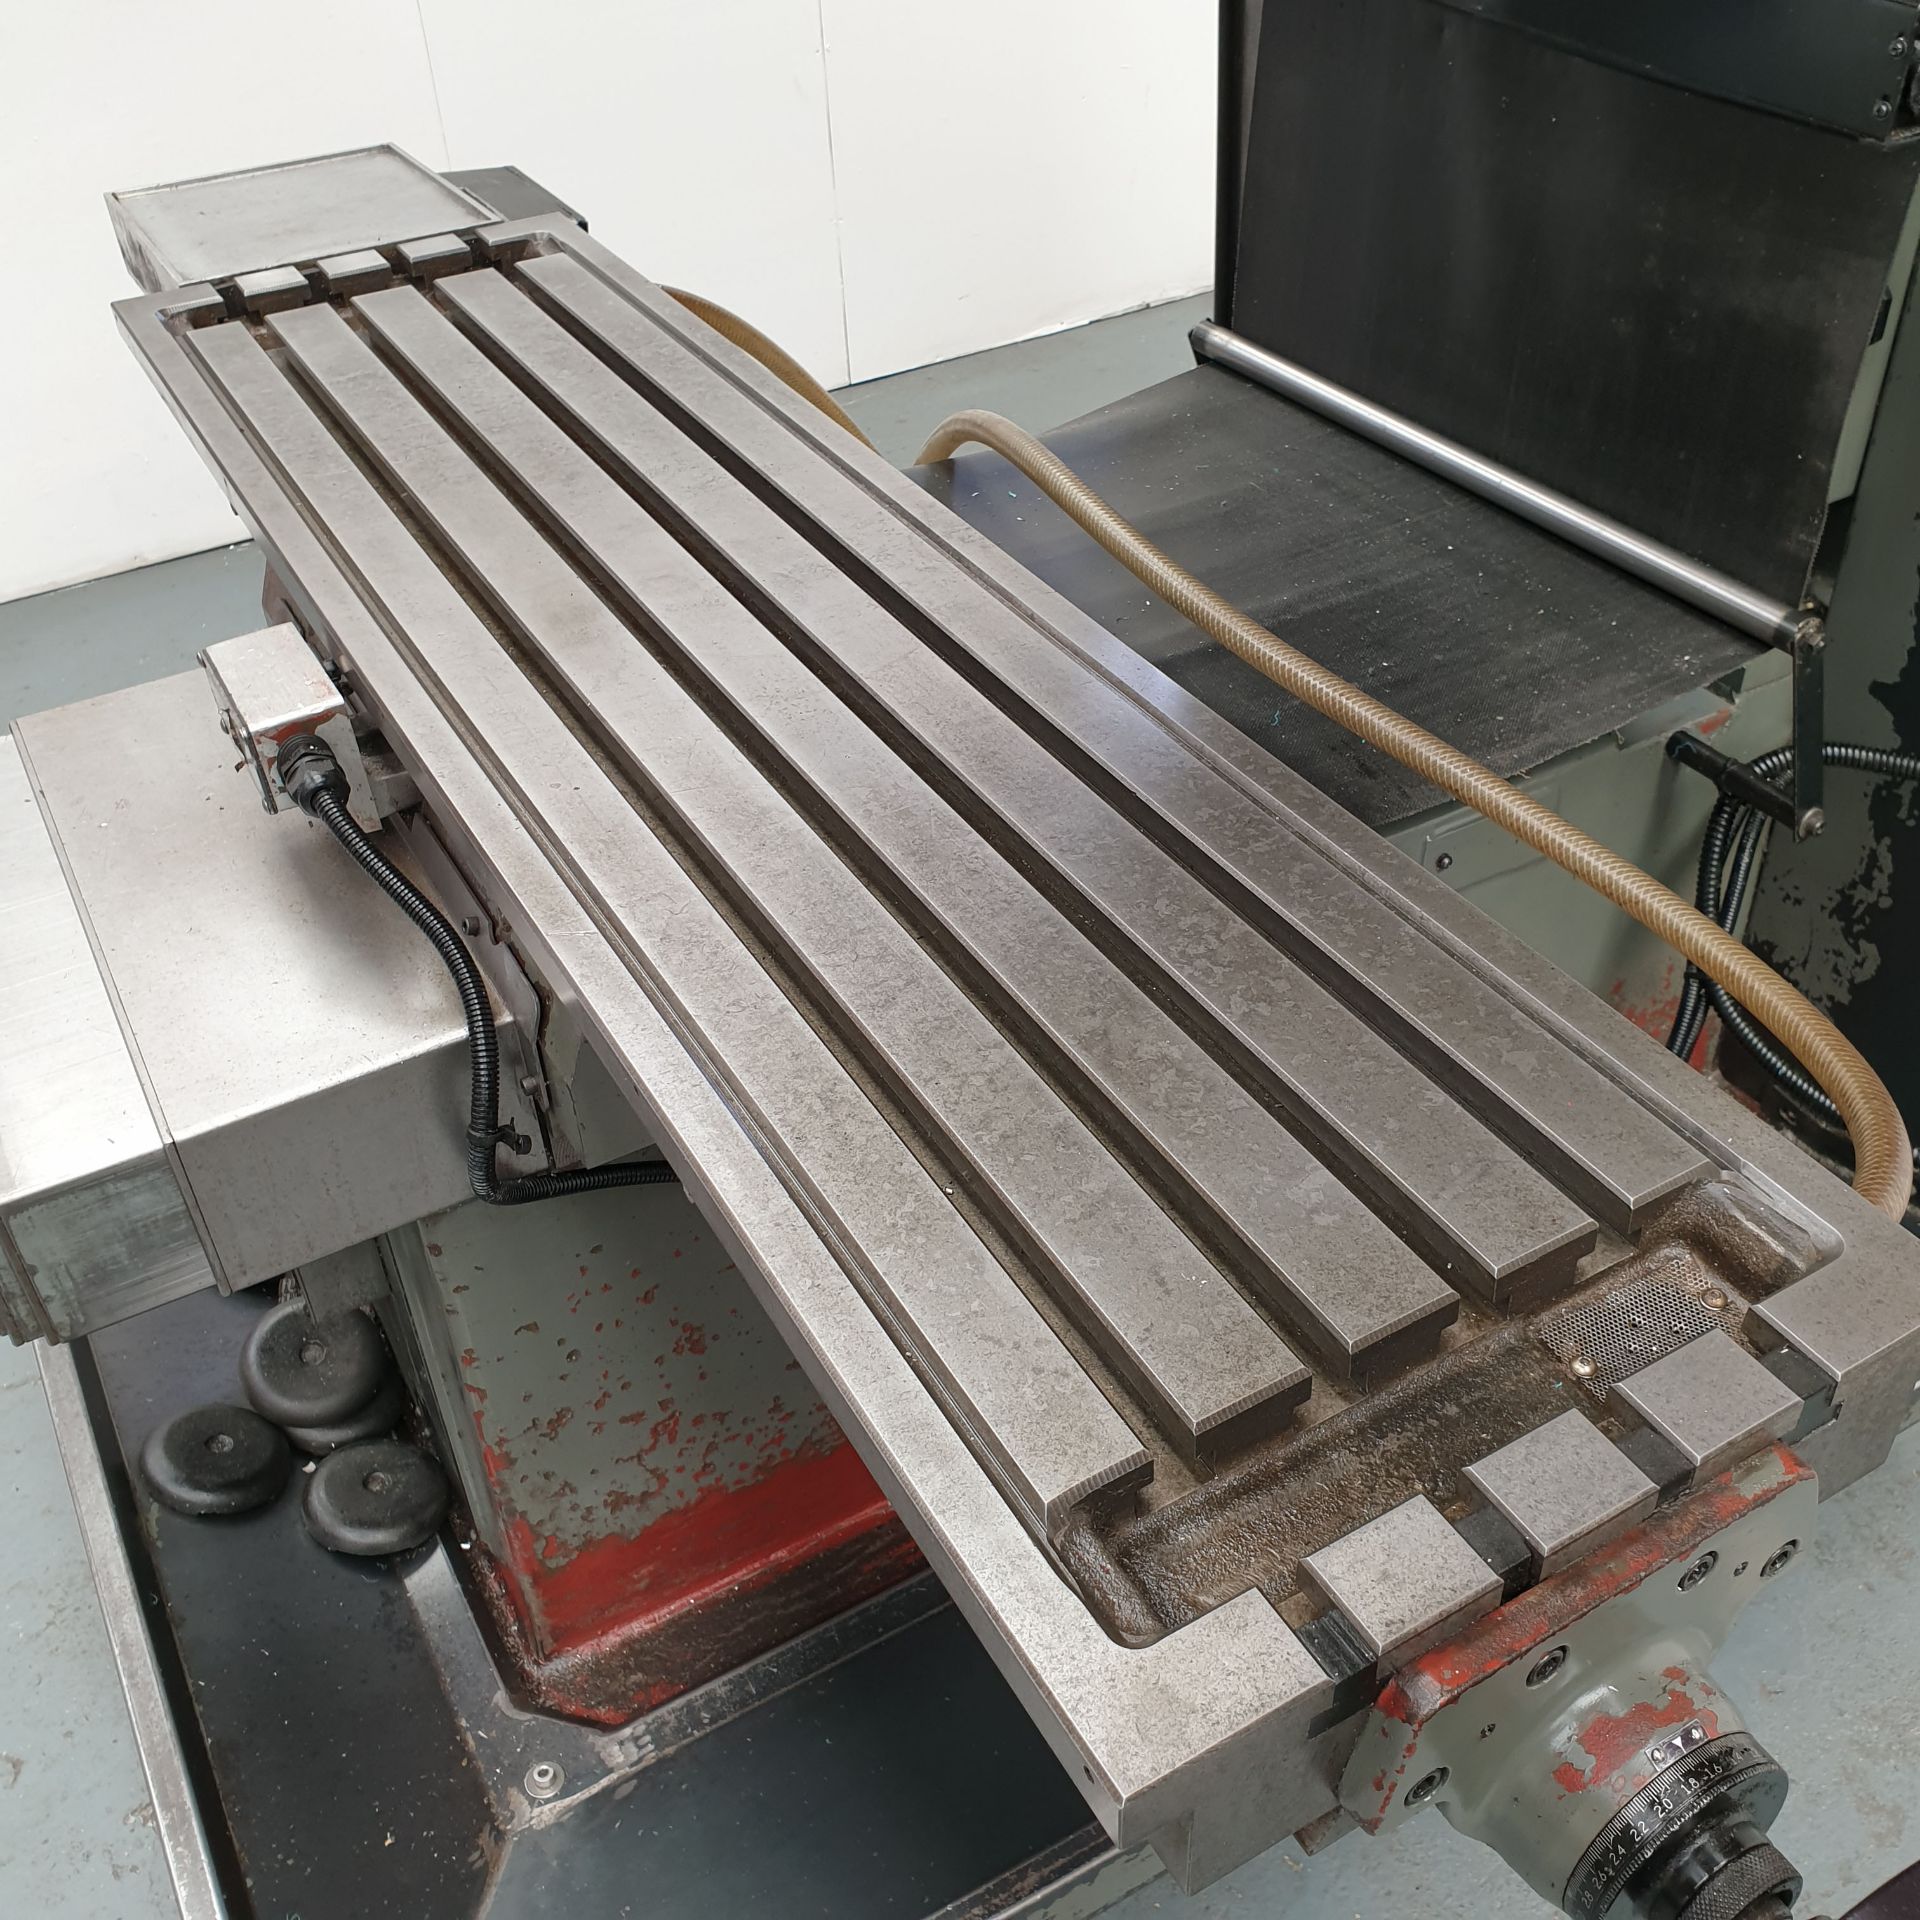 KRV Model DPM 3 Axis CNC Bed Mill With ProtoTrak SM Control. Table Size: 54" x 14". - Image 2 of 9